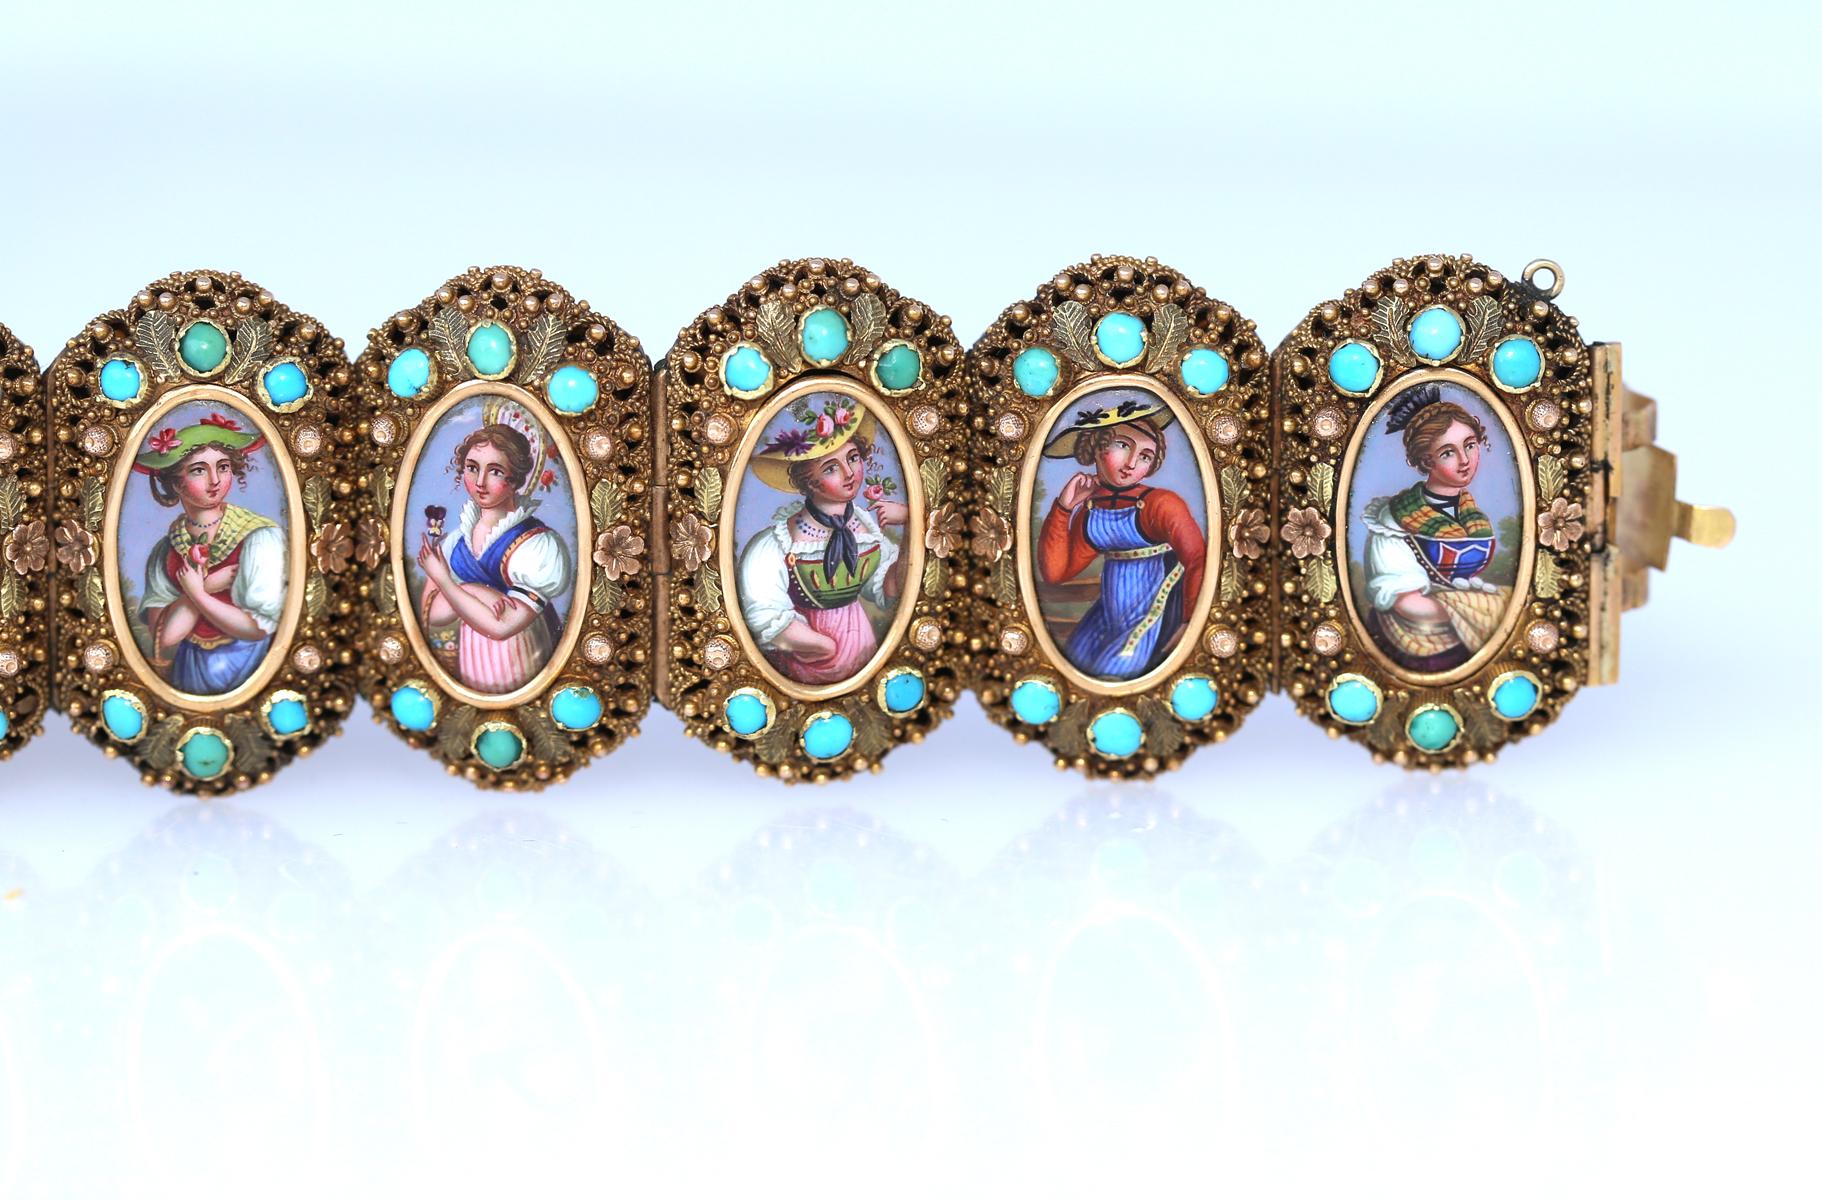  Locket Gold Bracelet Swiss Cantons Hand-Painted Ladies Turquoise, 1860 6